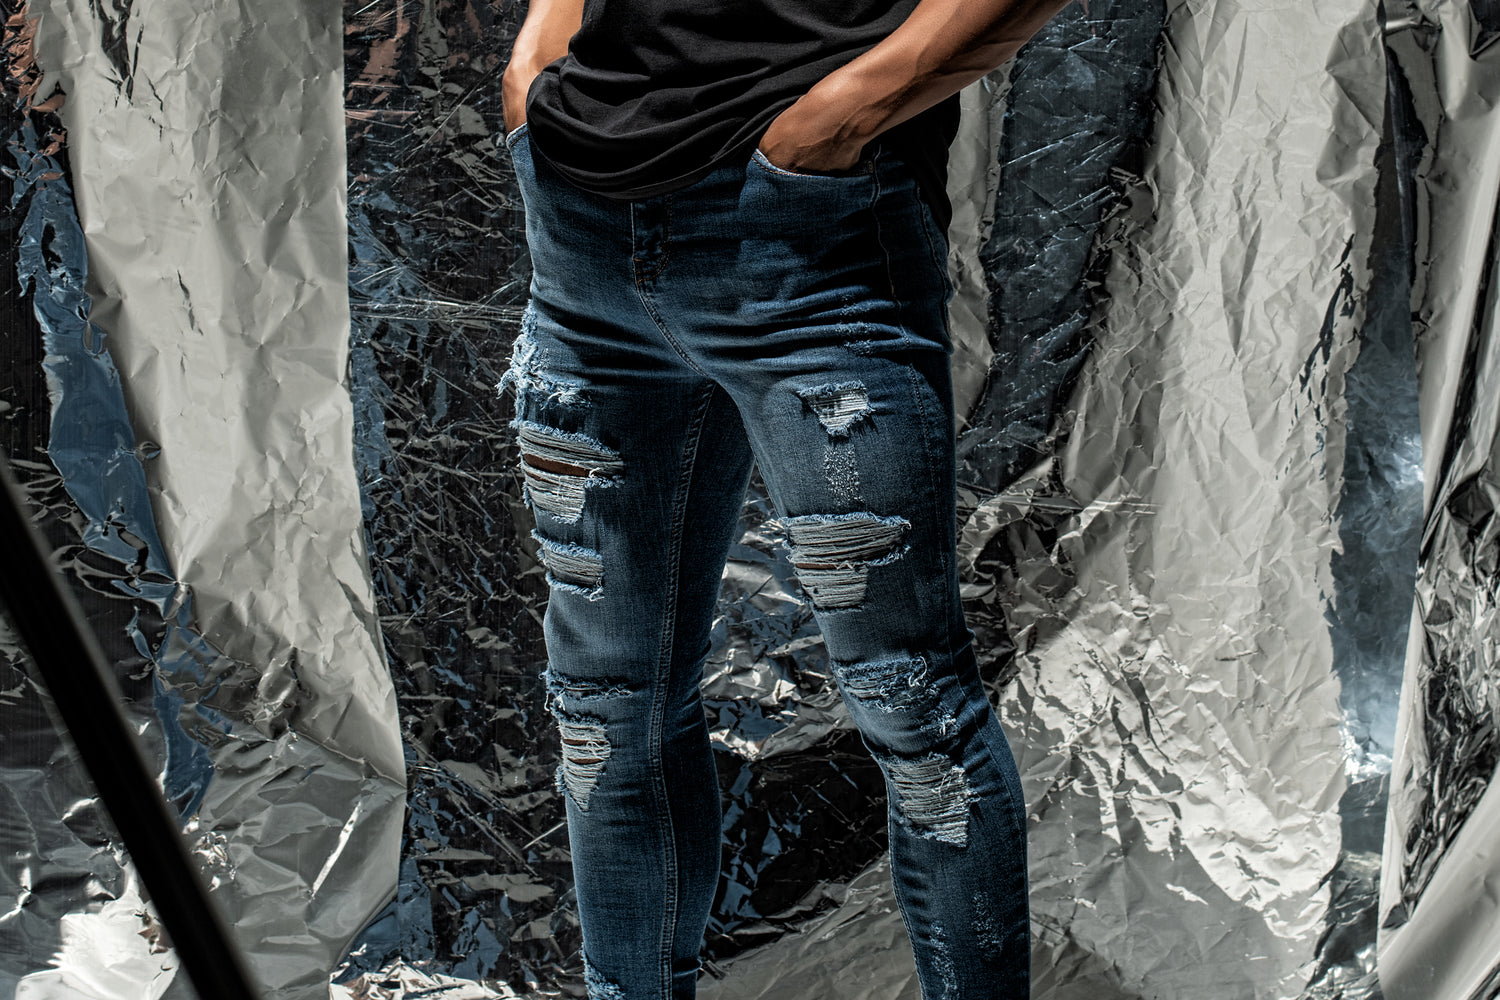 What Are Differences Between Ripped and Distressed Jeans